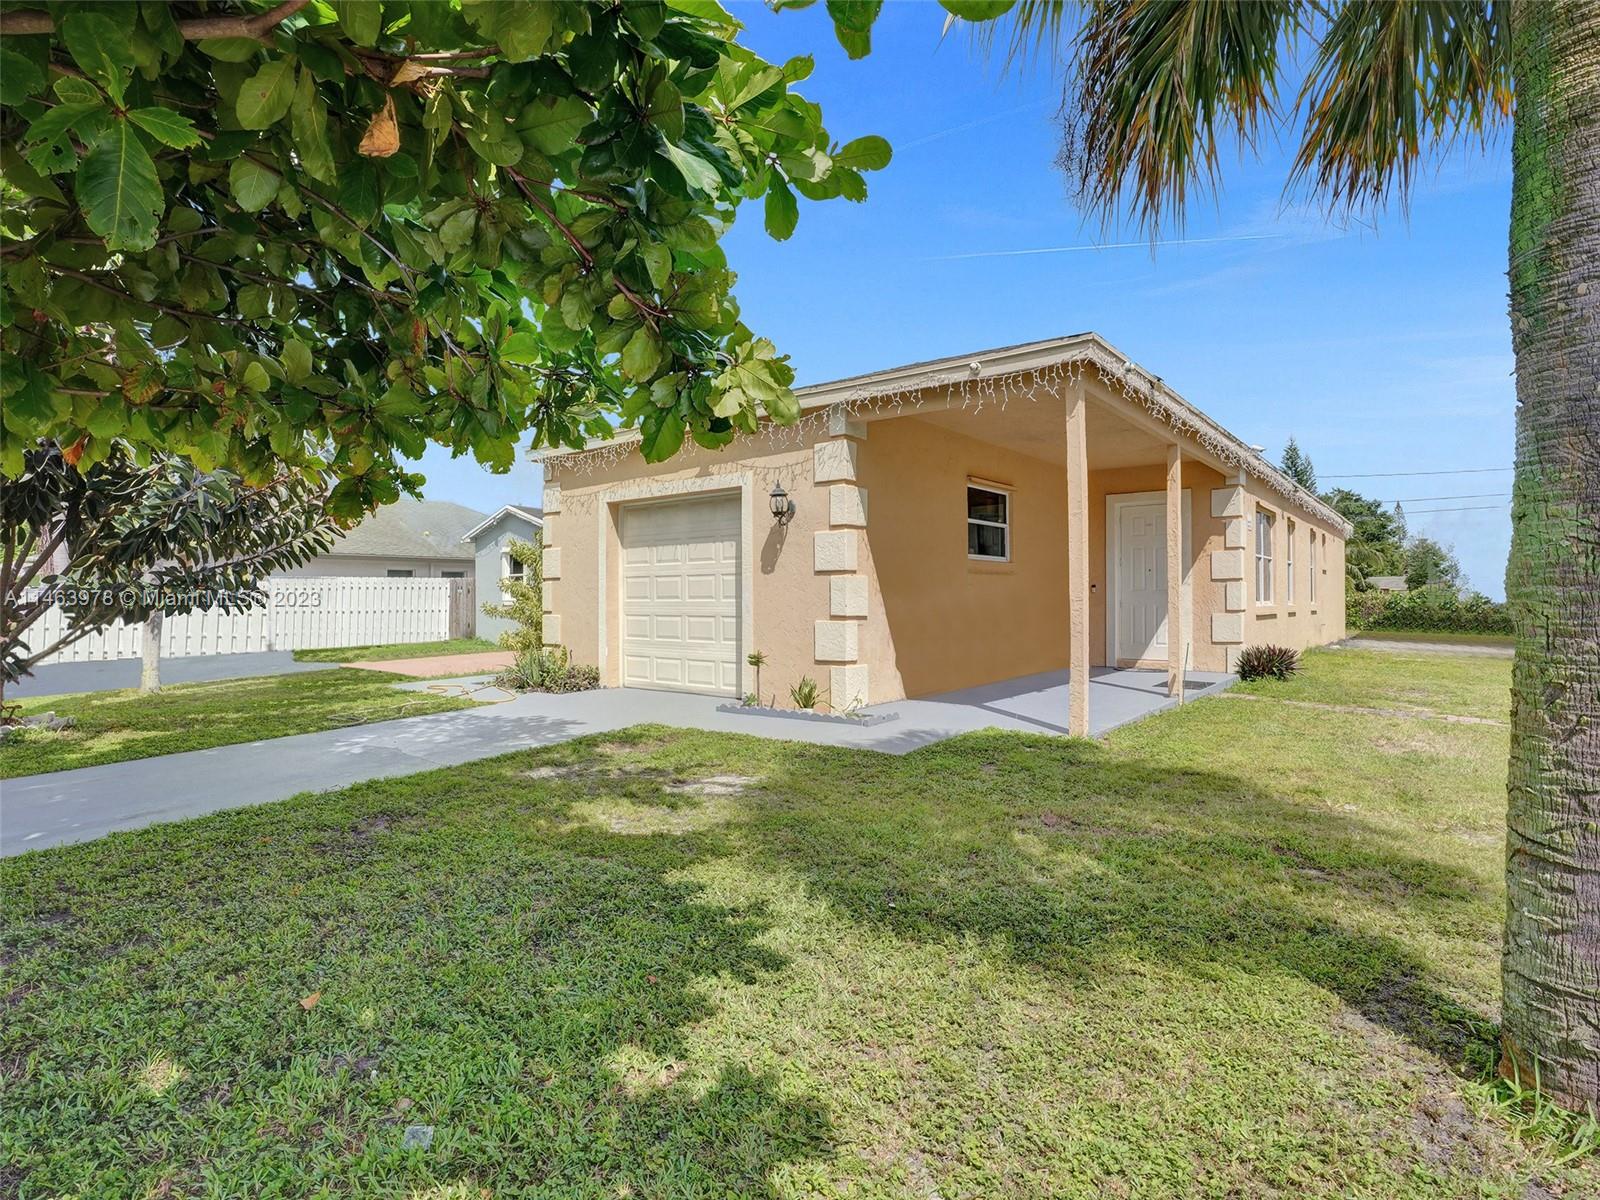 4202 Urquhart St St, Lake Worth, Palm Beach County, Florida - 3 Bedrooms  
2 Bathrooms - 